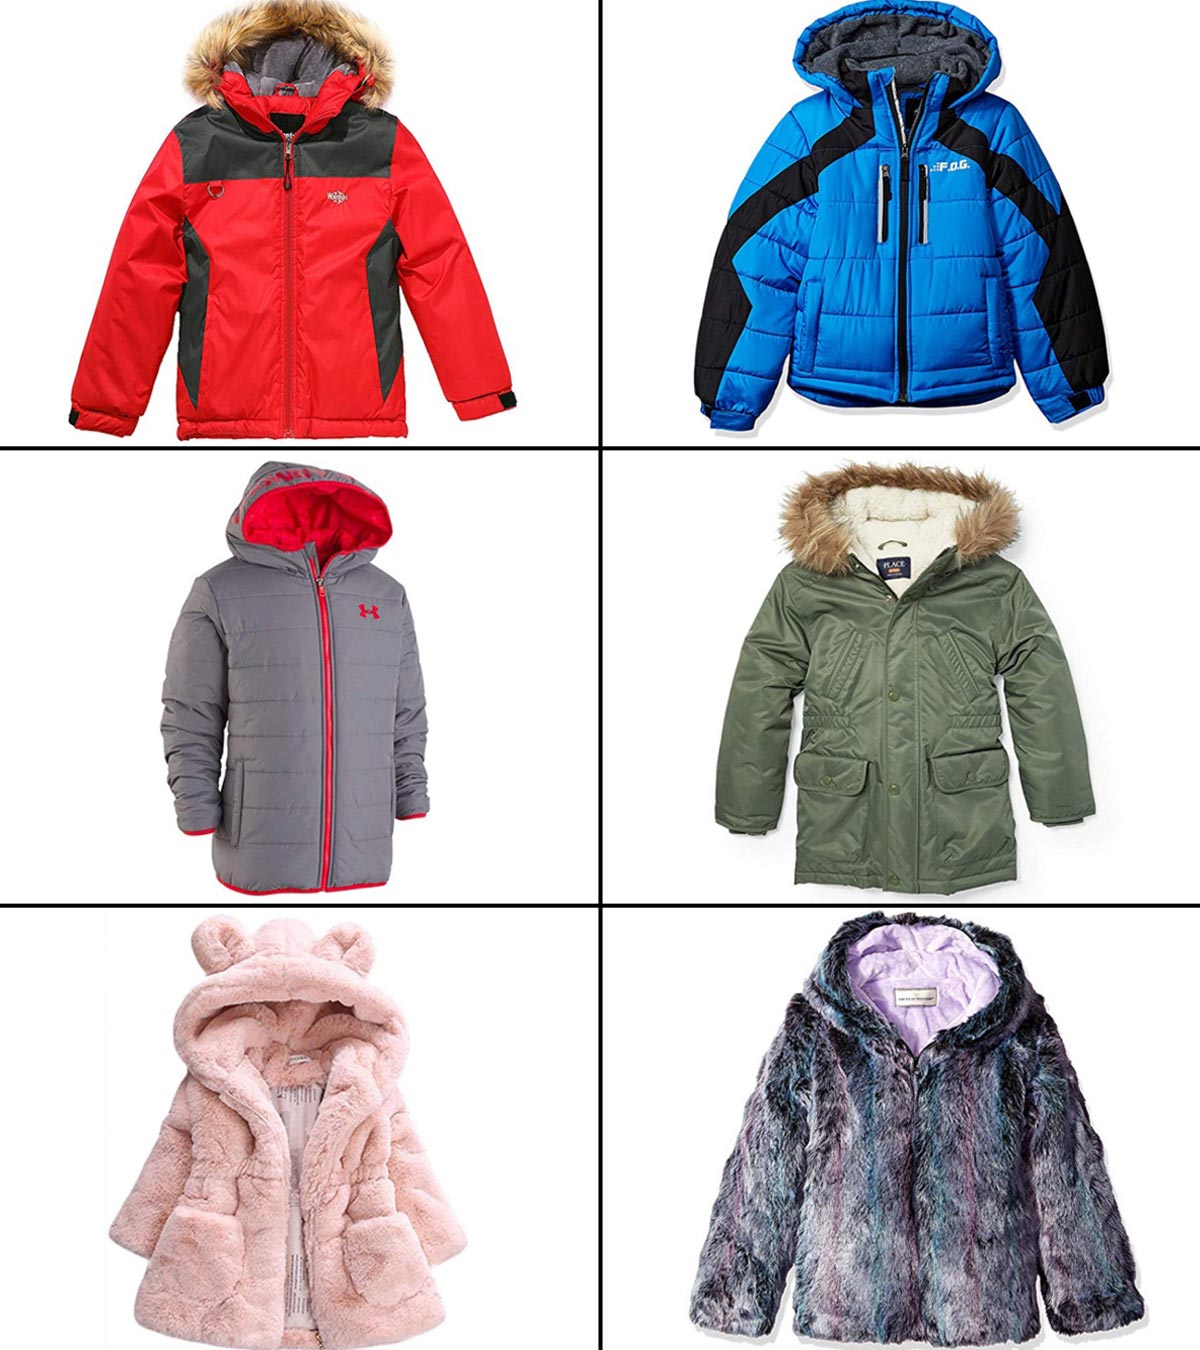 13 Best Kids’ Winter Coats To Keep Them Warm In 2023